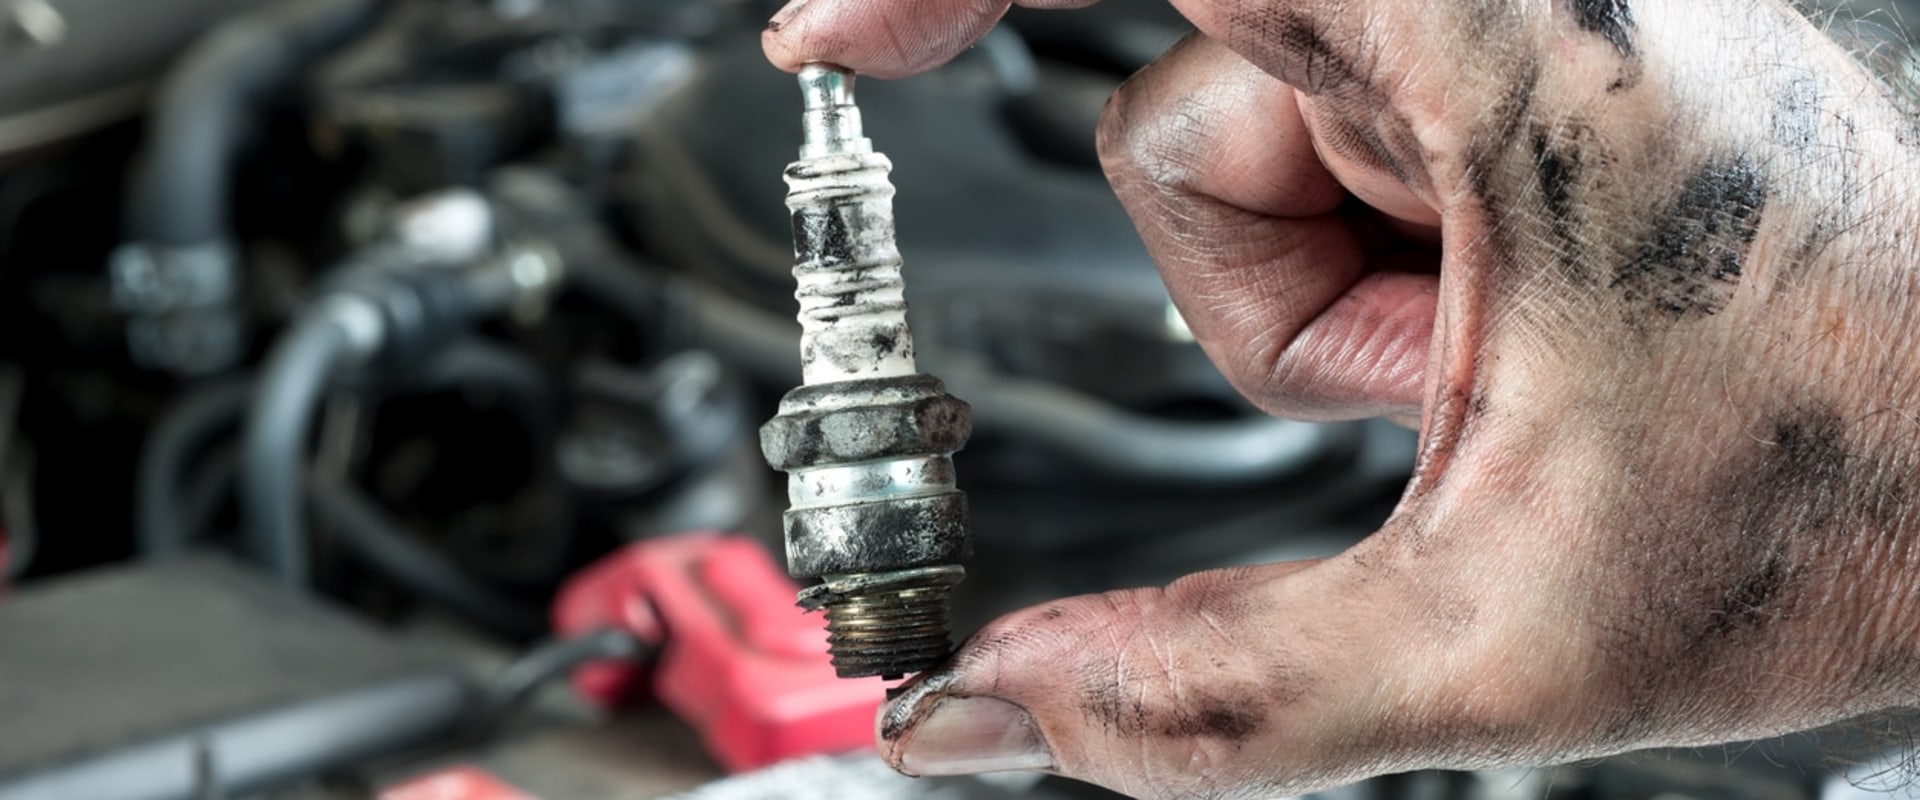 Everything You Need To Know About Spark Plugs